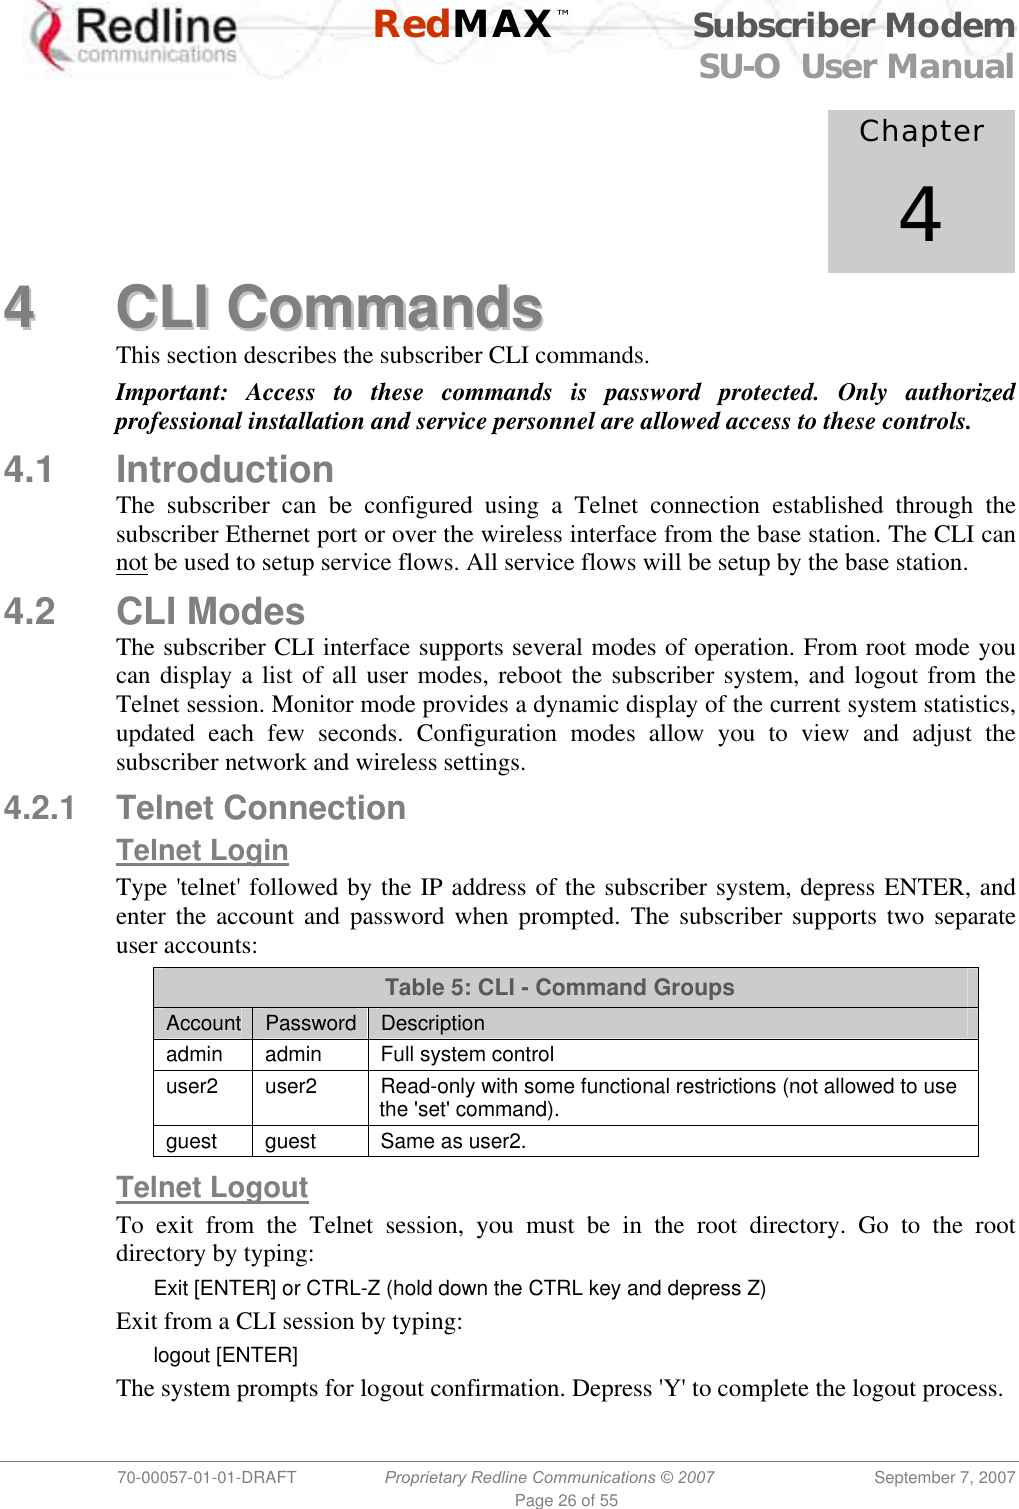    RedMAX™ Subscriber Modem SU-O  User Manual  70-00057-01-01-DRAFT  Proprietary Redline Communications © 2007 September 7, 2007 Page 26 of 55             Chapter 4 44  CCLLII  CCoommmmaannddss  This section describes the subscriber CLI commands. Important: Access to these commands is password protected. Only authorized professional installation and service personnel are allowed access to these controls. 4.1 Introduction The subscriber can be configured using a Telnet connection established through the subscriber Ethernet port or over the wireless interface from the base station. The CLI can not be used to setup service flows. All service flows will be setup by the base station. 4.2 CLI Modes The subscriber CLI interface supports several modes of operation. From root mode you can display a list of all user modes, reboot the subscriber system, and logout from the Telnet session. Monitor mode provides a dynamic display of the current system statistics, updated each few seconds. Configuration modes allow you to view and adjust the subscriber network and wireless settings. 4.2.1 Telnet Connection Telnet Login Type &apos;telnet&apos; followed by the IP address of the subscriber system, depress ENTER, and enter the account and password when prompted. The subscriber supports two separate user accounts: Table 5: CLI - Command Groups Account  Password  Description admin admin  Full system control user2  user2  Read-only with some functional restrictions (not allowed to use the &apos;set&apos; command). guest  guest  Same as user2.  Telnet Logout To exit from the Telnet session, you must be in the root directory. Go to the root directory by typing: Exit [ENTER] or CTRL-Z (hold down the CTRL key and depress Z) Exit from a CLI session by typing: logout [ENTER] The system prompts for logout confirmation. Depress &apos;Y&apos; to complete the logout process. 